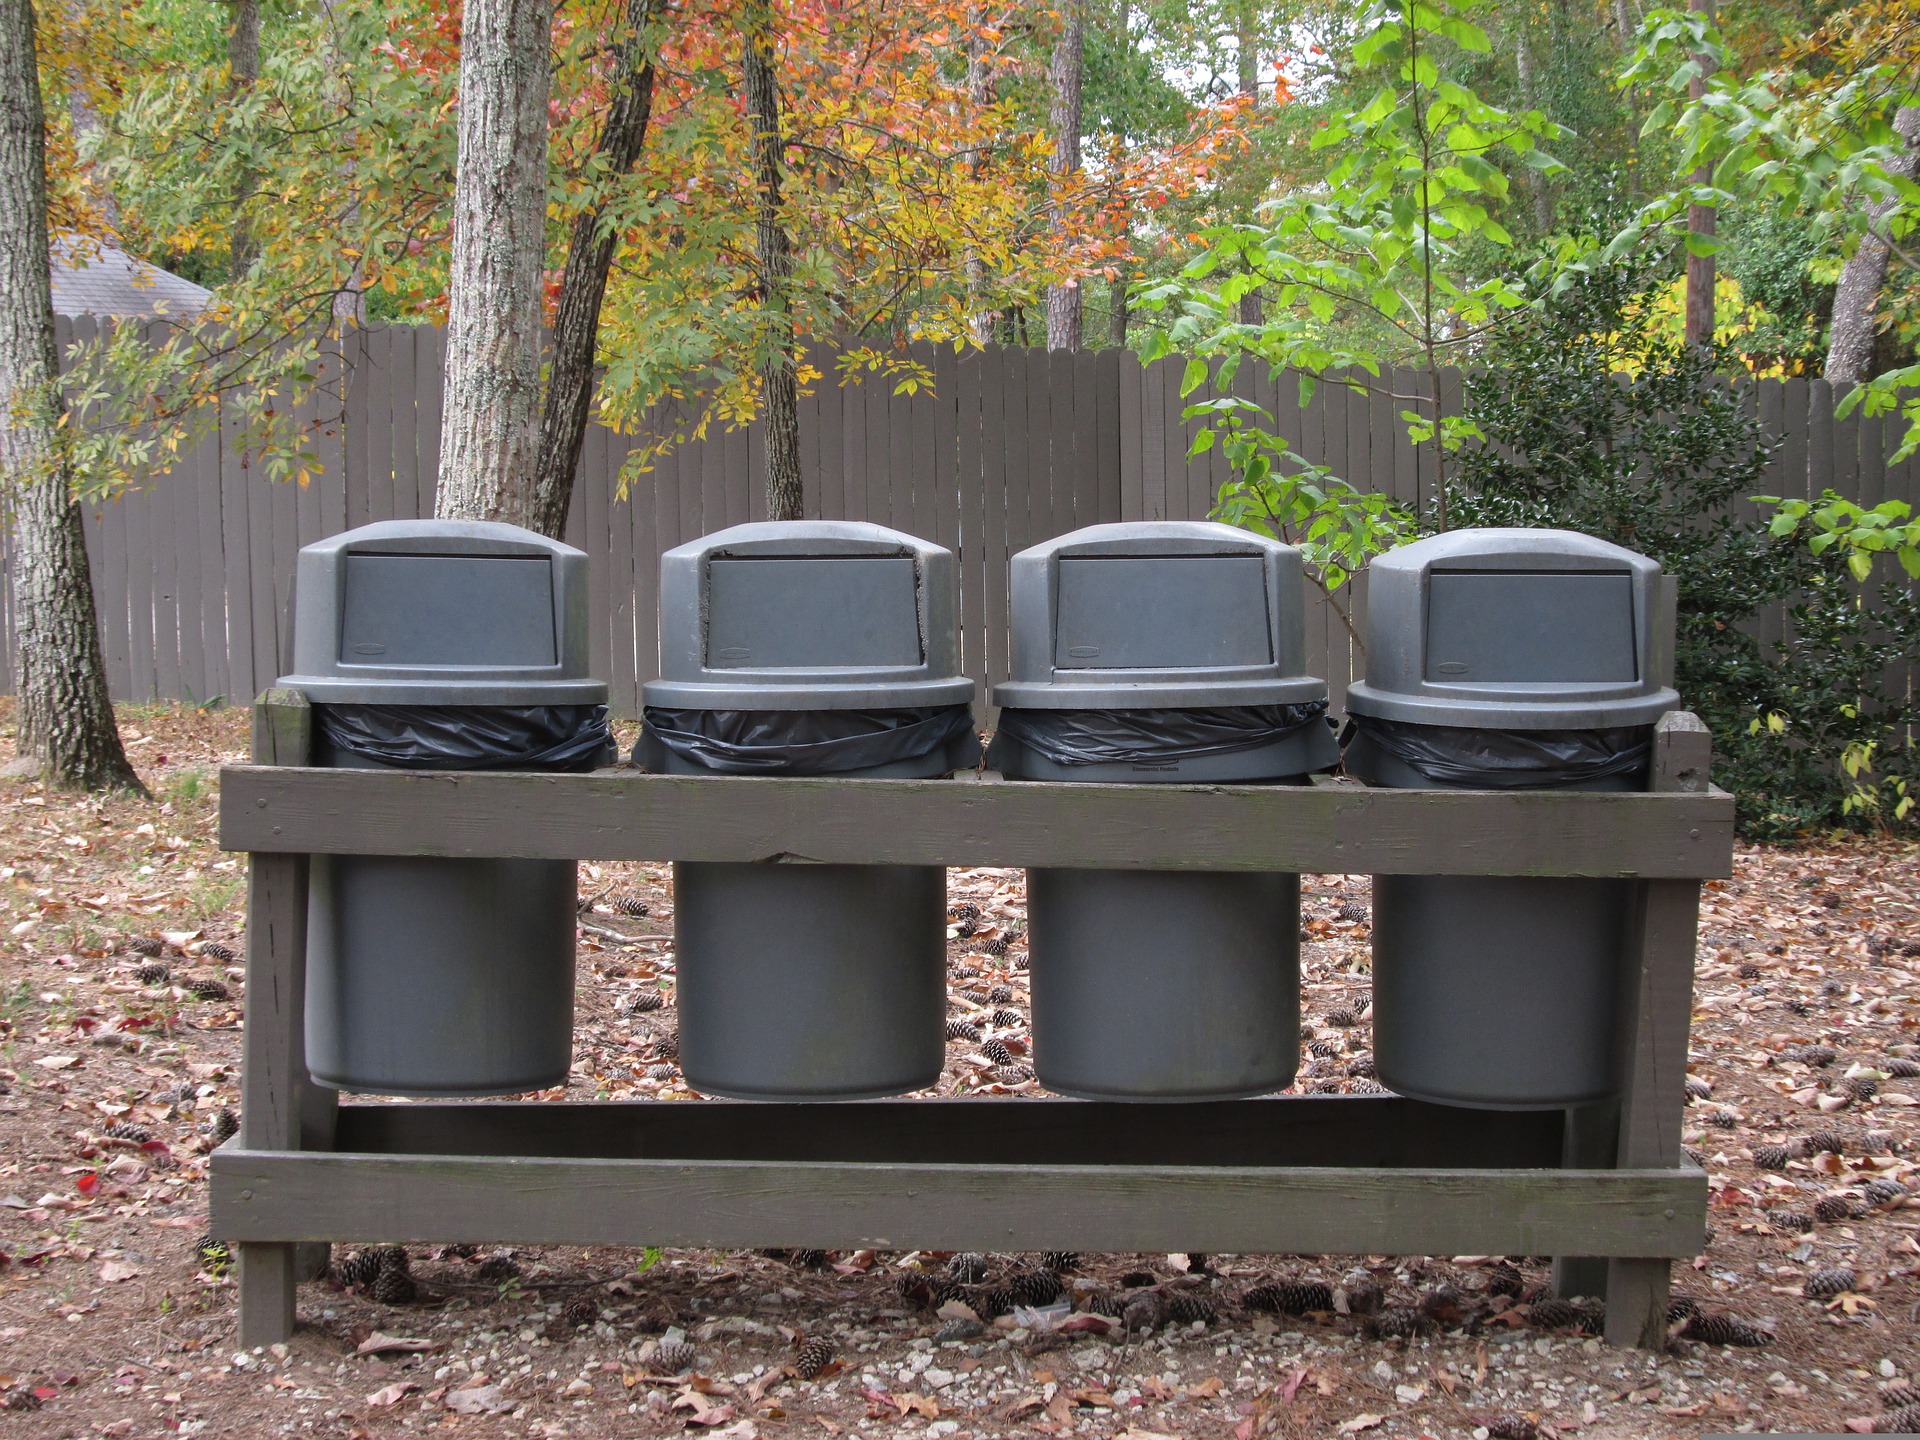 image of 4 trash containers with can liners